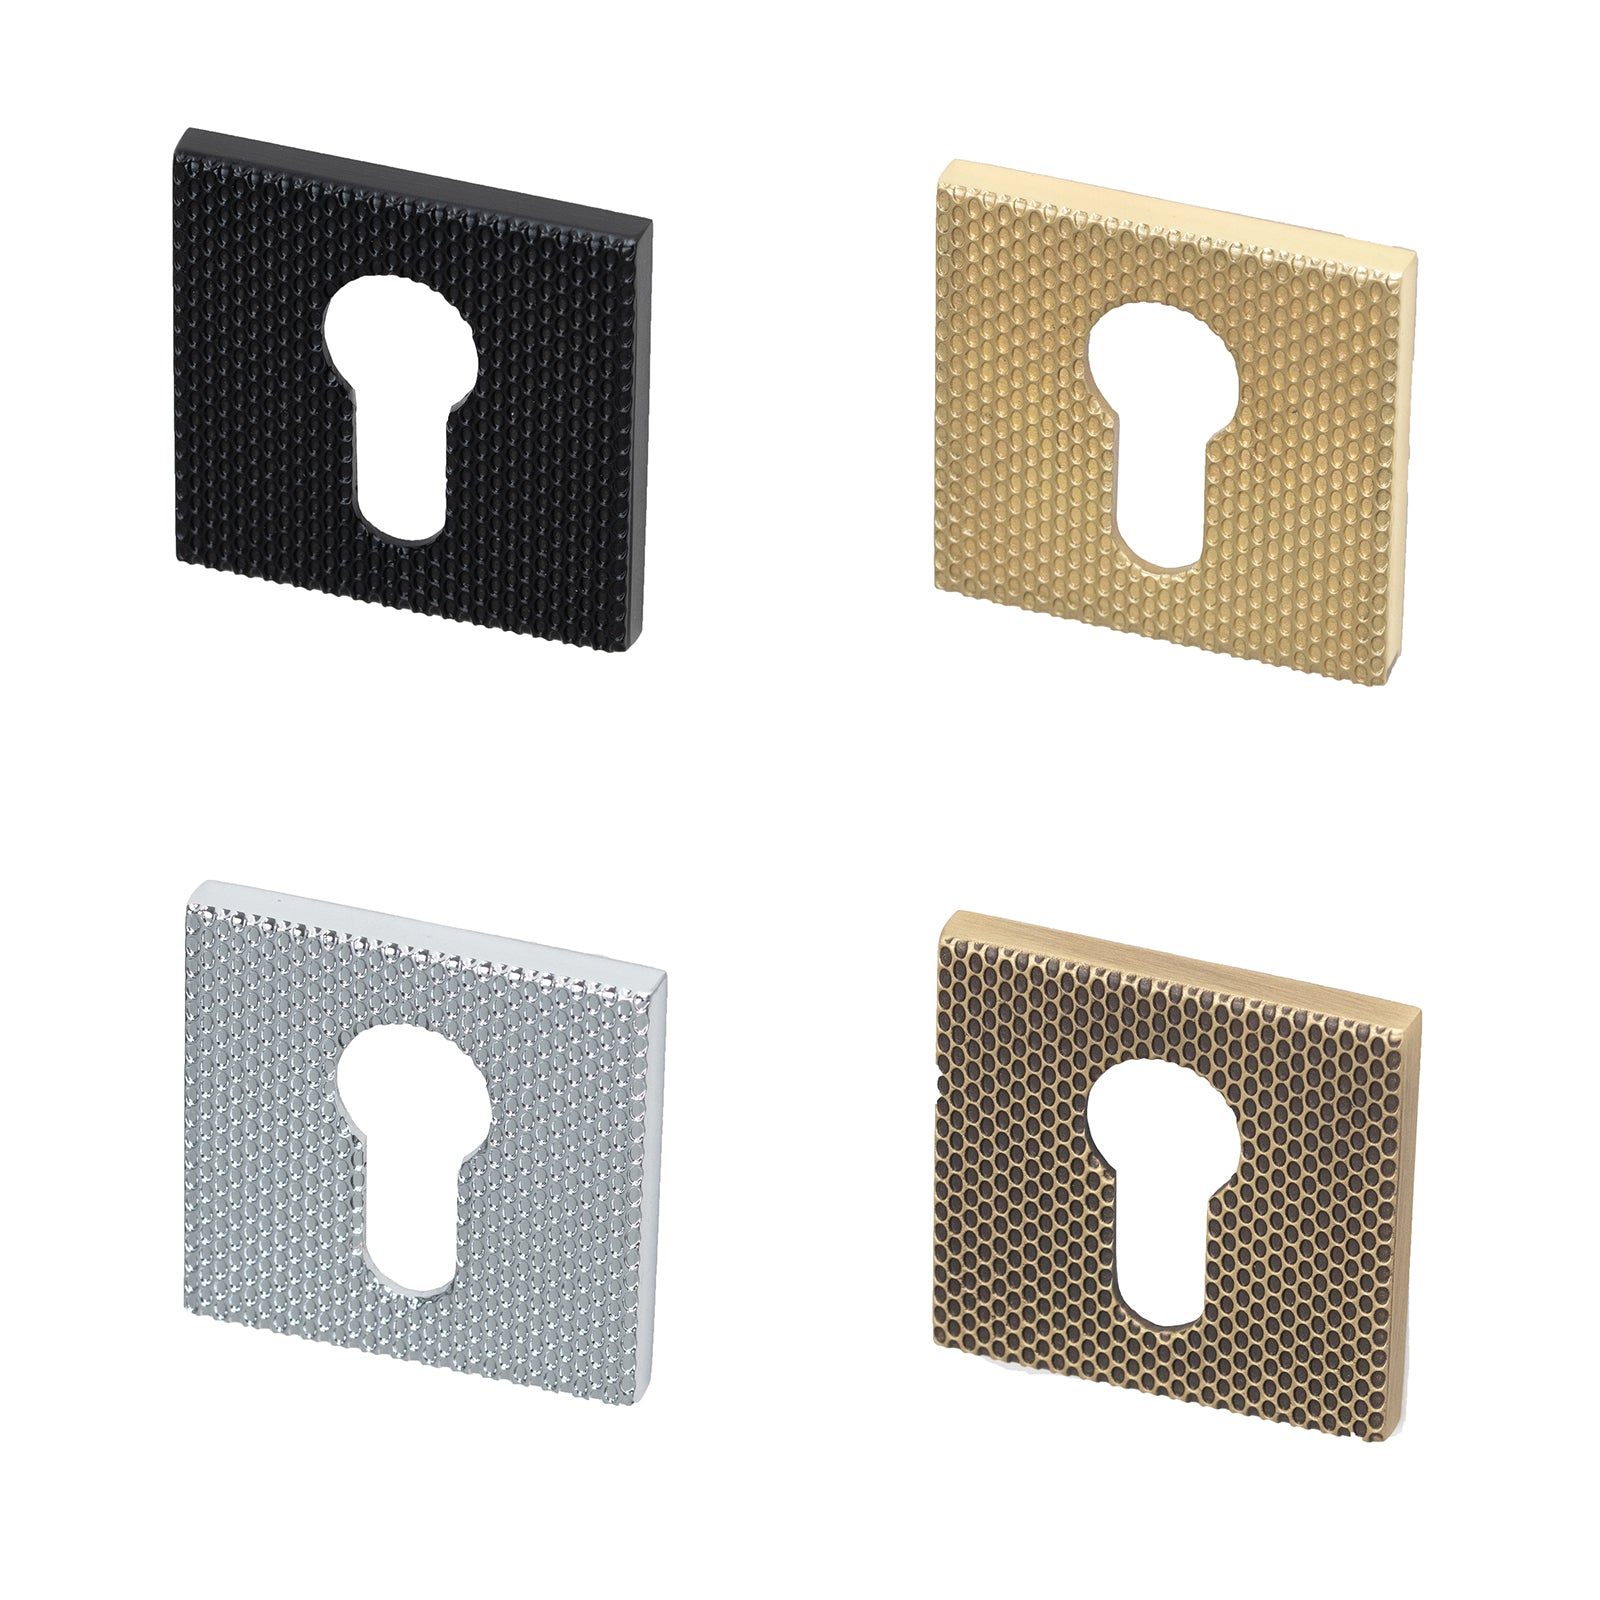 Tupai Euro Profile escutcheons with organic Waterfall effect in four distinct finishes with 6mm thick square rose plate with Waterfall effect on rose.